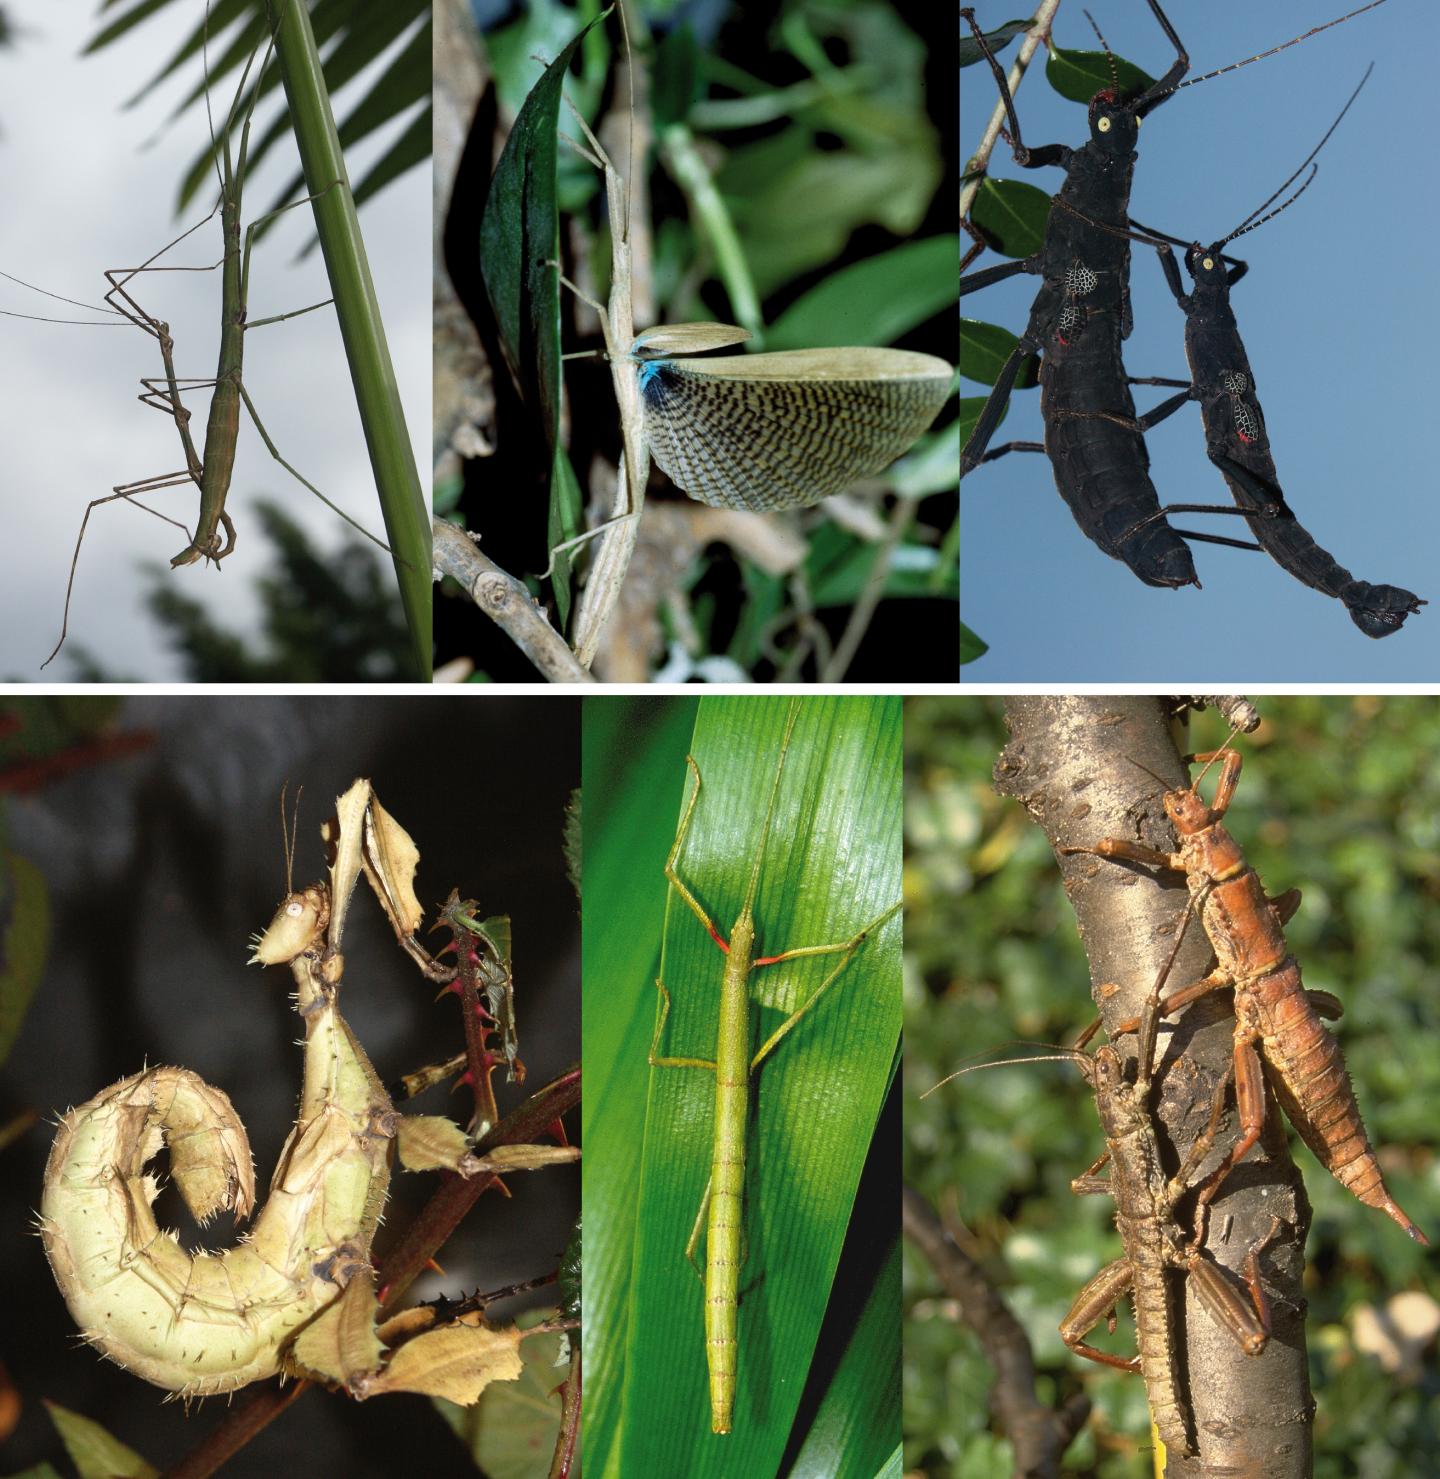 Stick Insects - New World and Old World Comparison